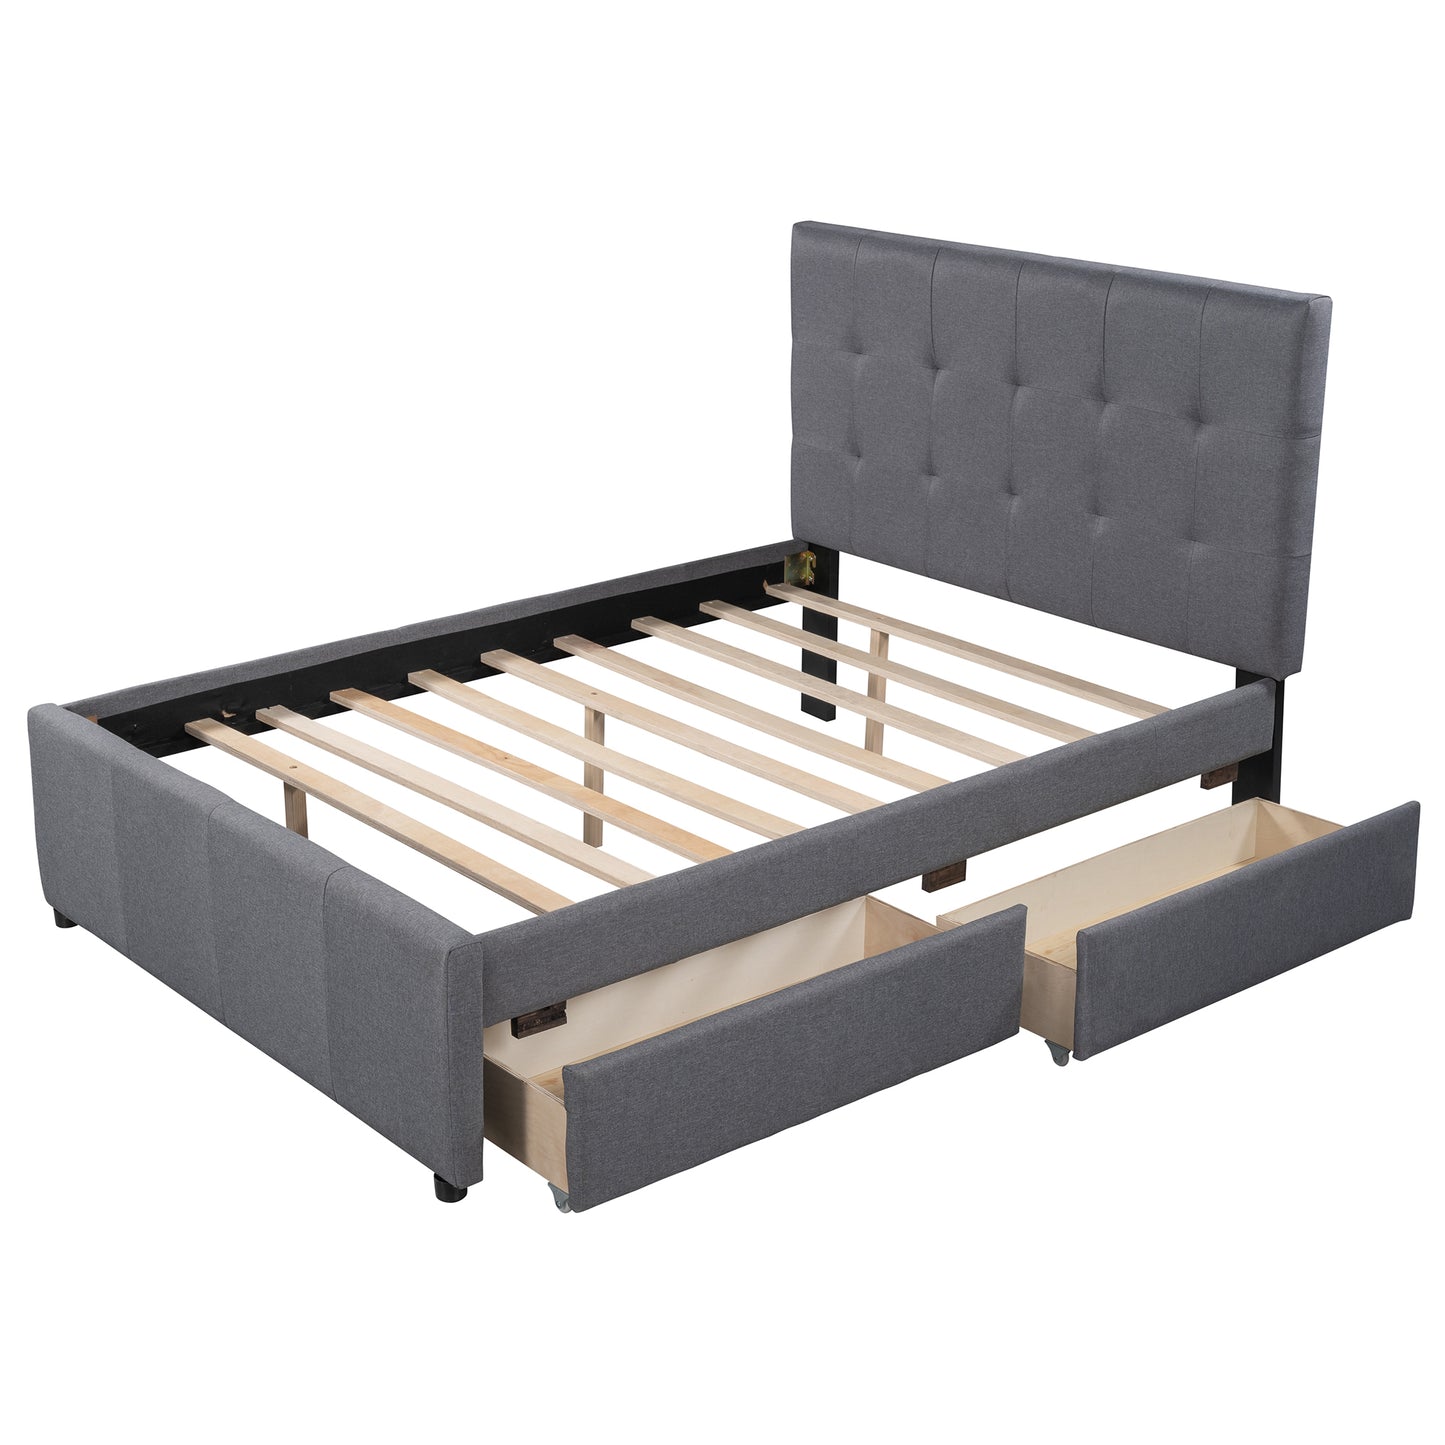 Linen Upholstered Platform Bed With Headboard and Two Drawers, Full